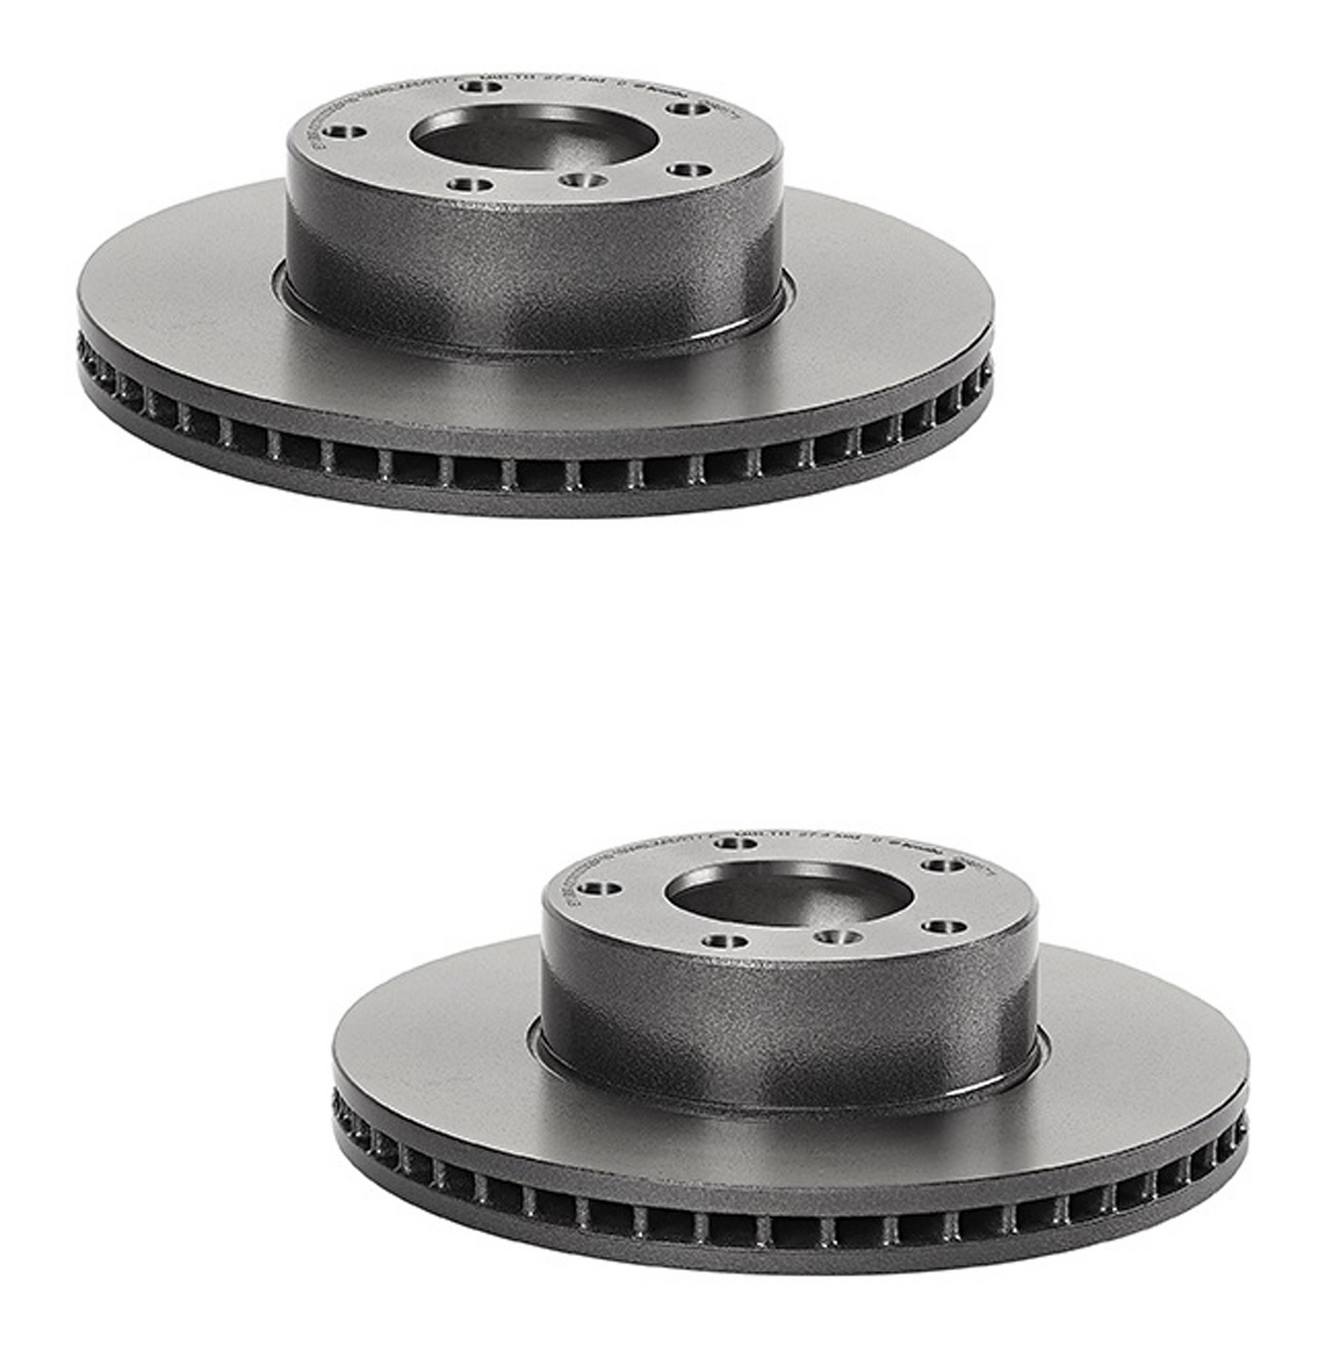 Brembo Brake Pads and Rotors Kit - Front and Rear (315mm/272mm) (Low-Met)